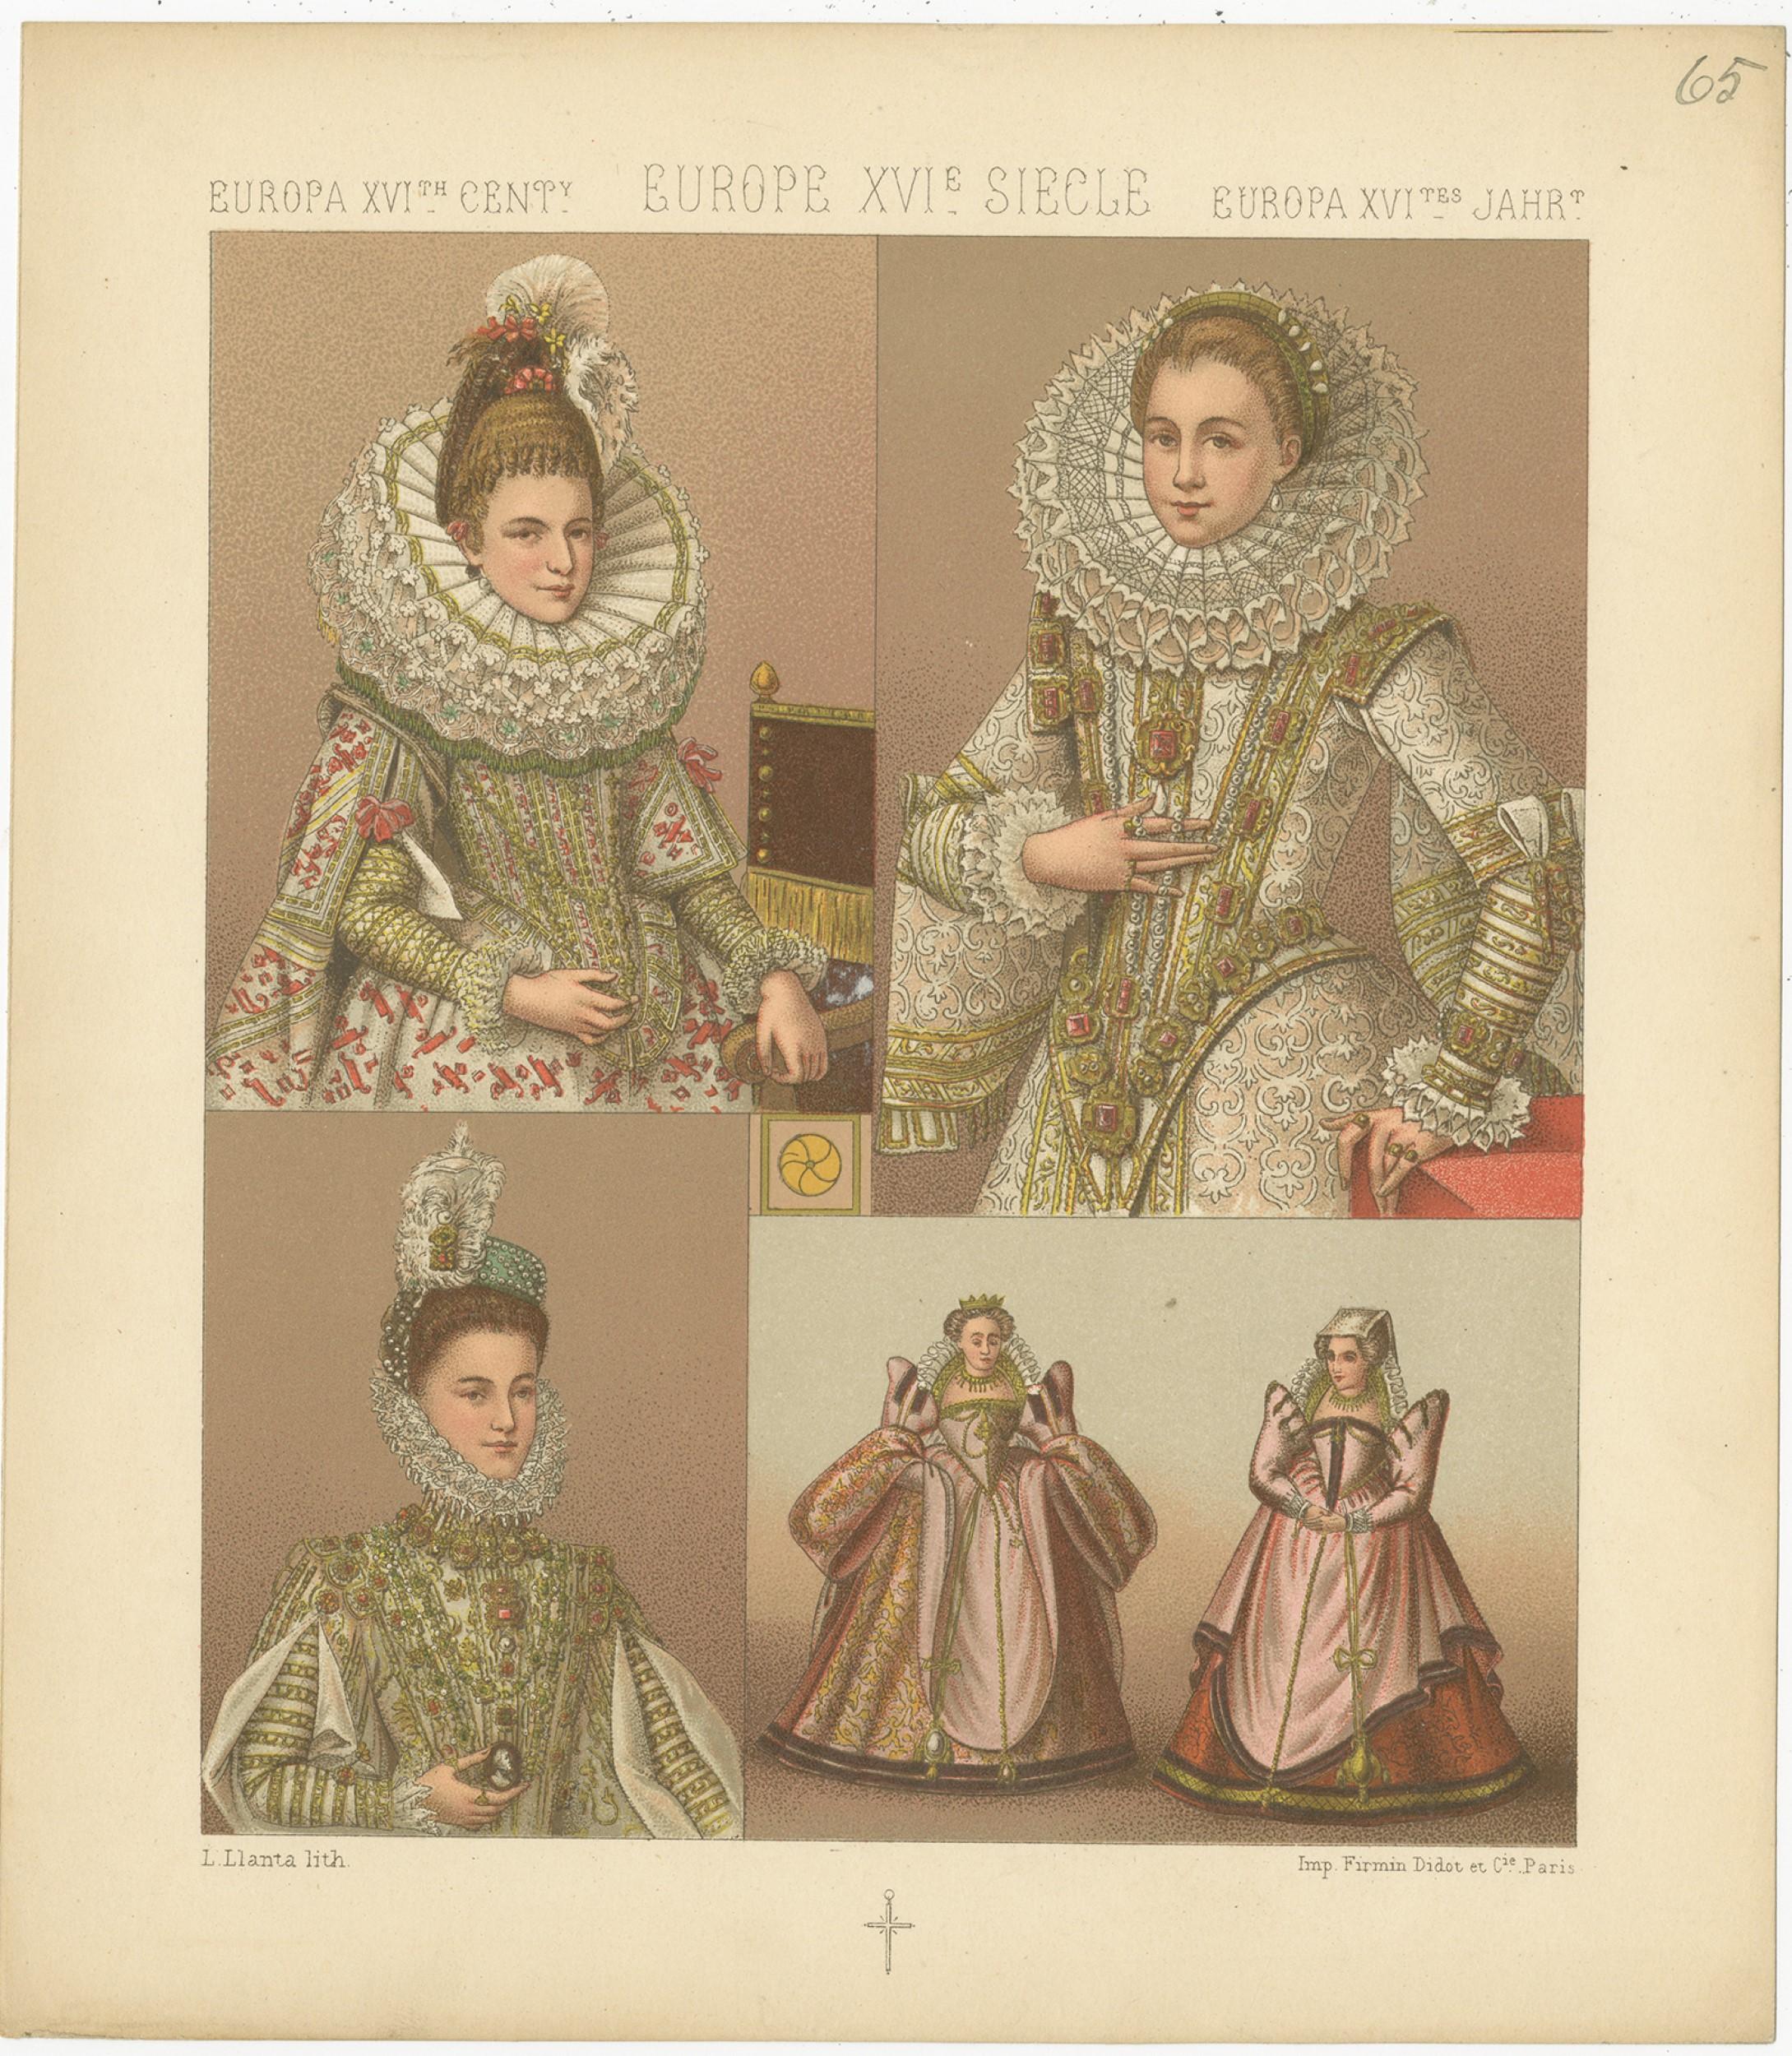 19th Century Pl. 65 Antique Print of European XVIth Century Costumes by Racinet 'circa 1880' For Sale